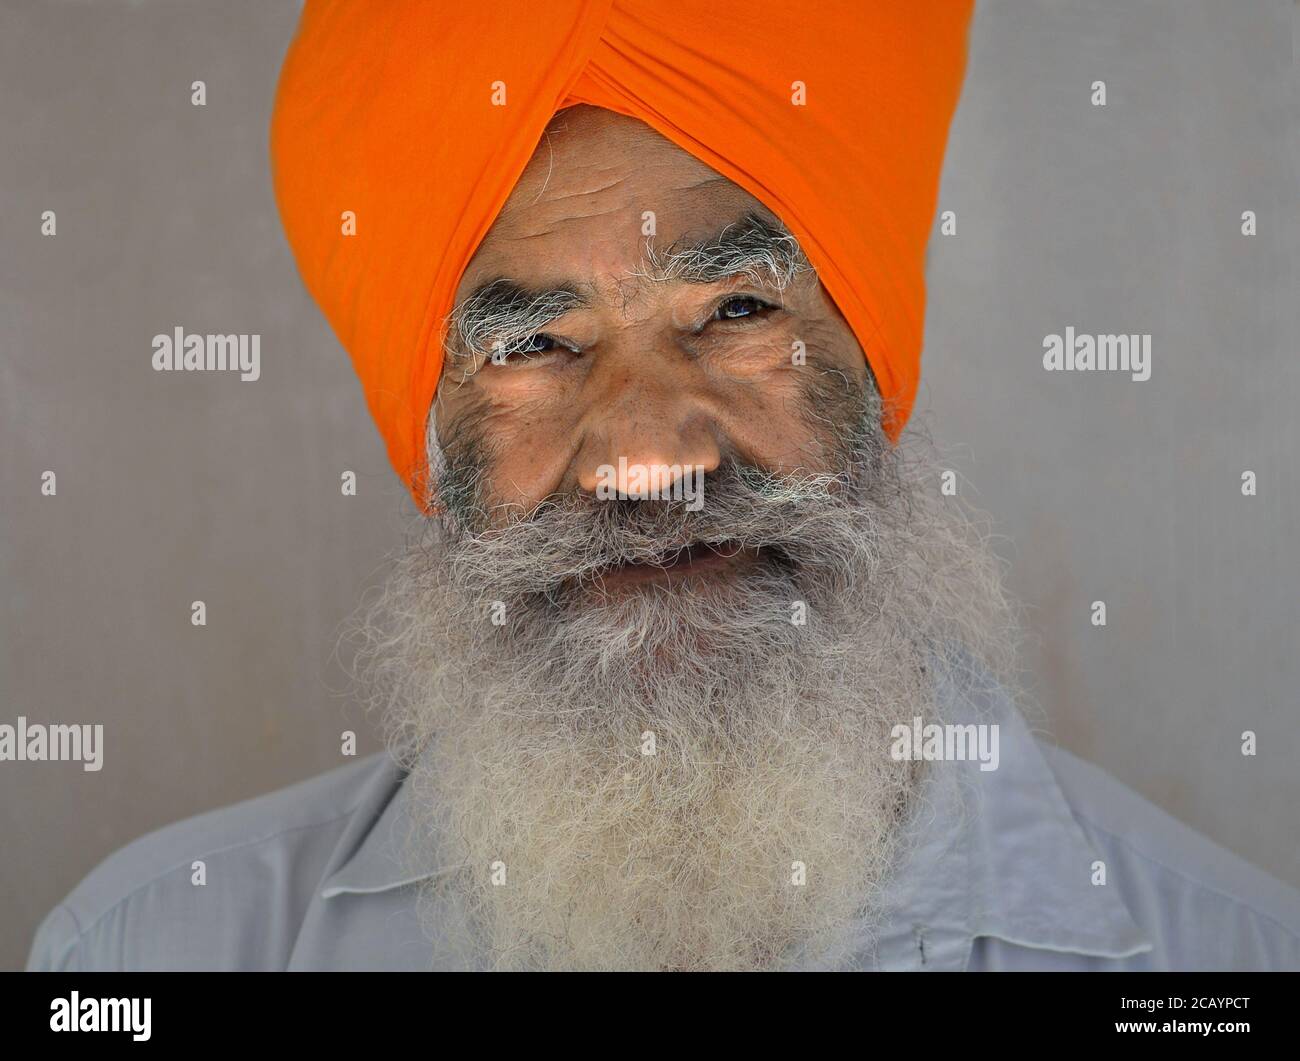 Elderly dignified Indian Sikh man with long beard wears a traditional turban (dastar) in orange and poses for the camera. Stock Photo